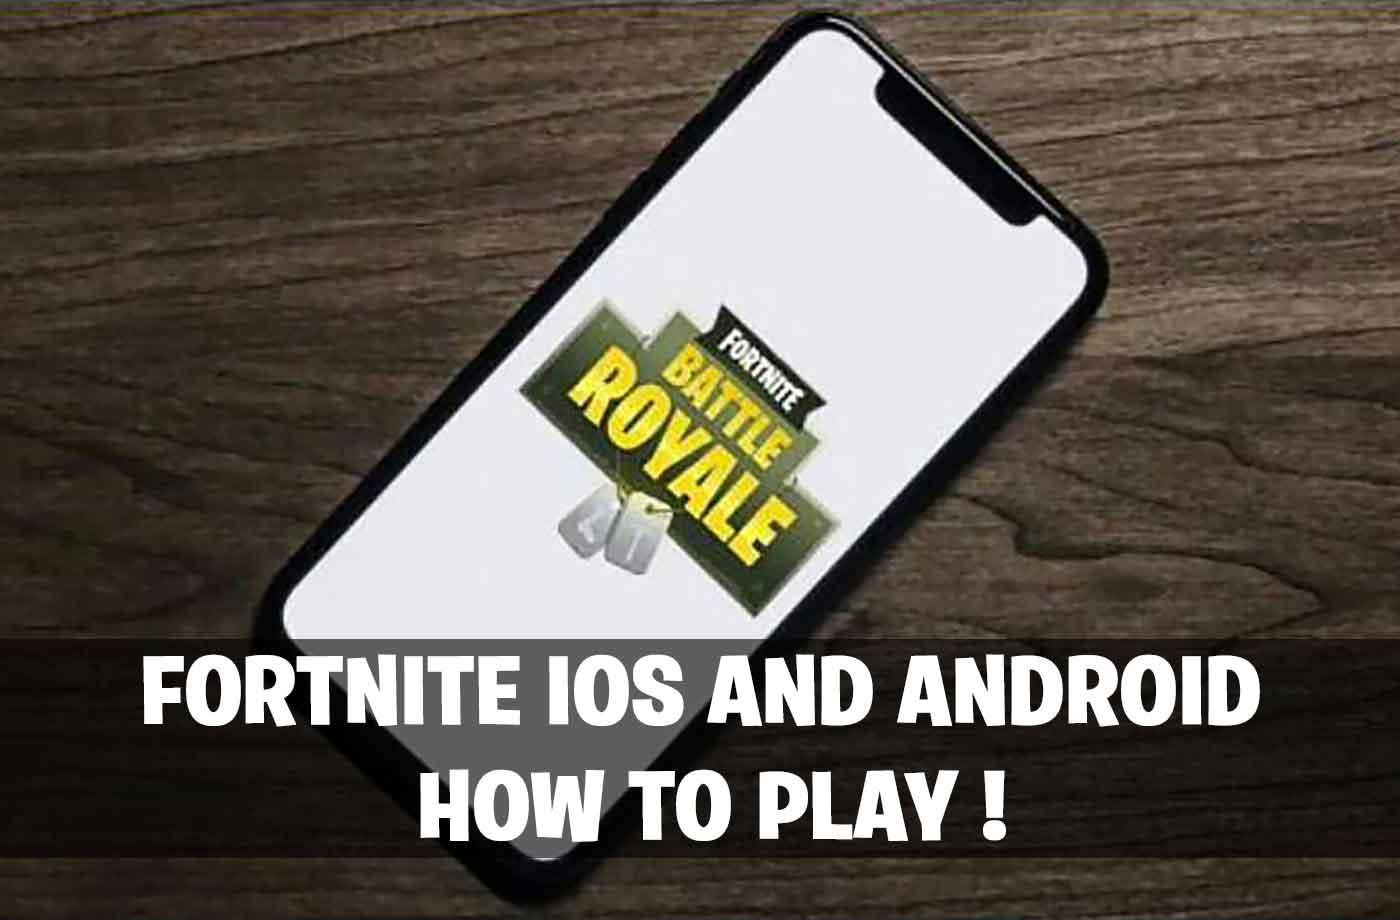 Fortnite Kill Logo - Fortnite Battle Royale how to play on iPhone iOS and Android APK